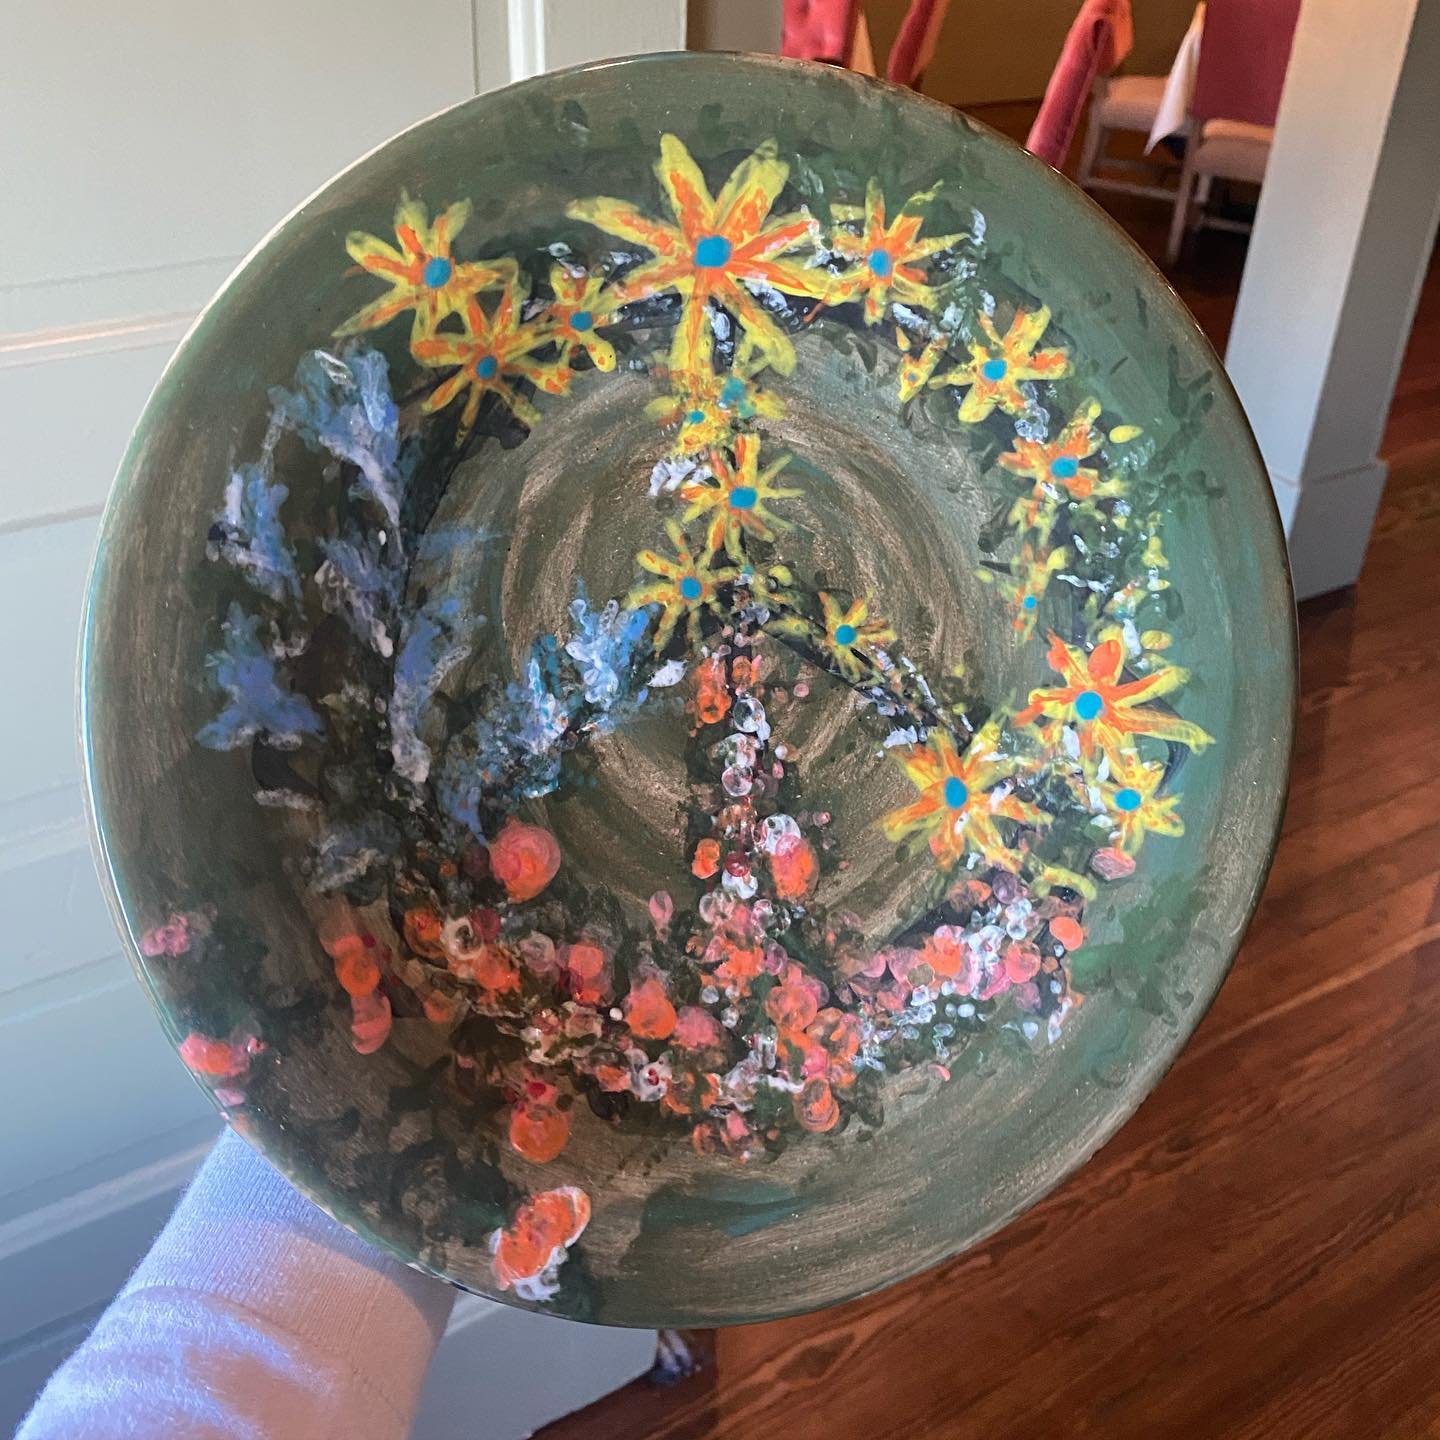 Tonight is @emptybowlsmckinney !

&ldquo;This McKinney annual event features a showcase of handcrafted bowls made and decorated by professional and Amateur artists. Guests enjoy a sampling of gourmet soups and light bites prepared by chefs from a var